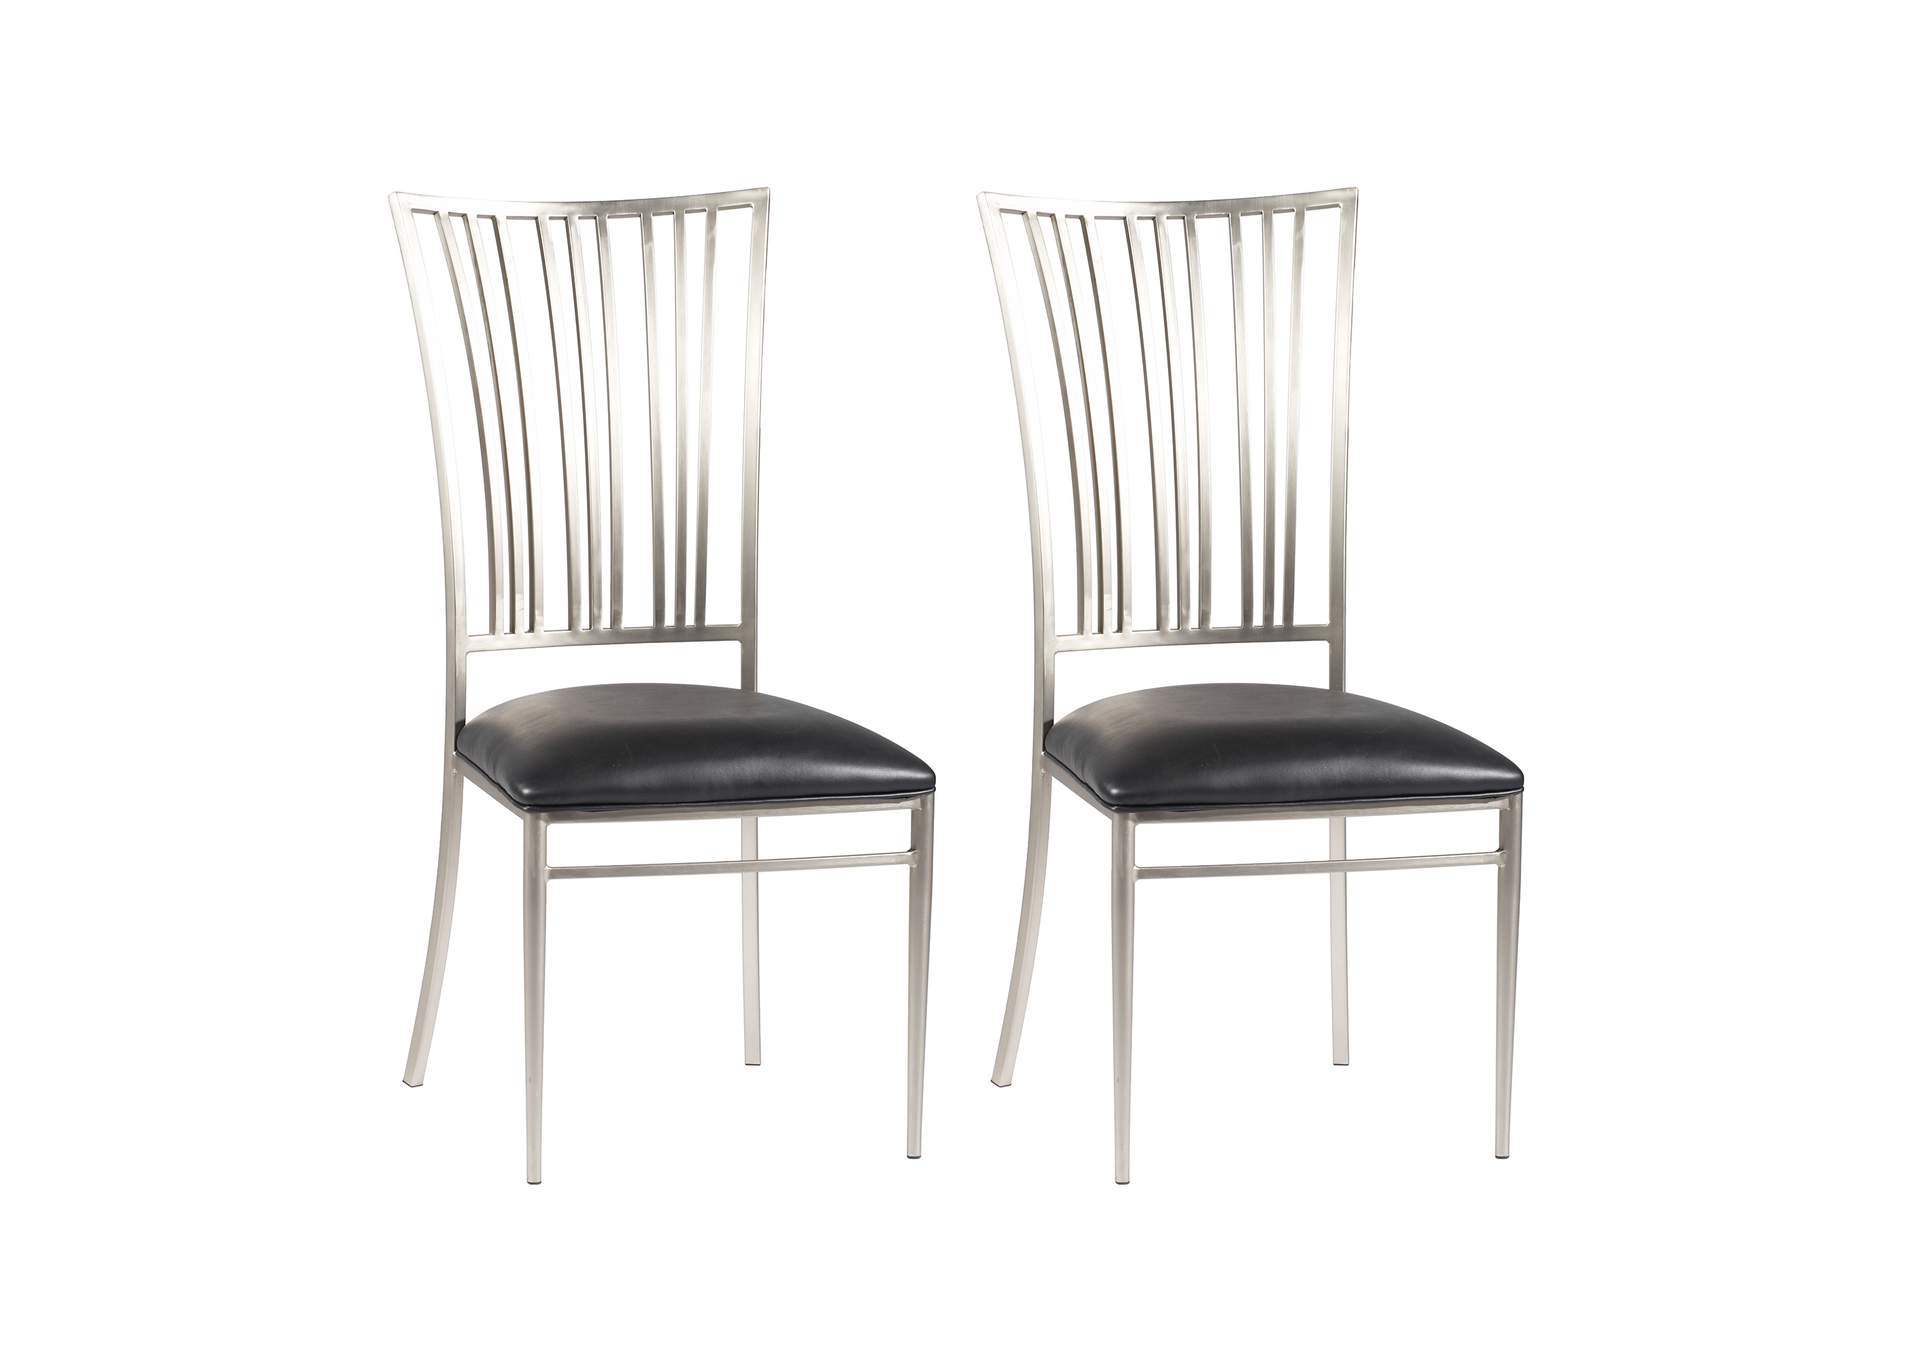 Fan-Back Side Chair,Chintaly Imports